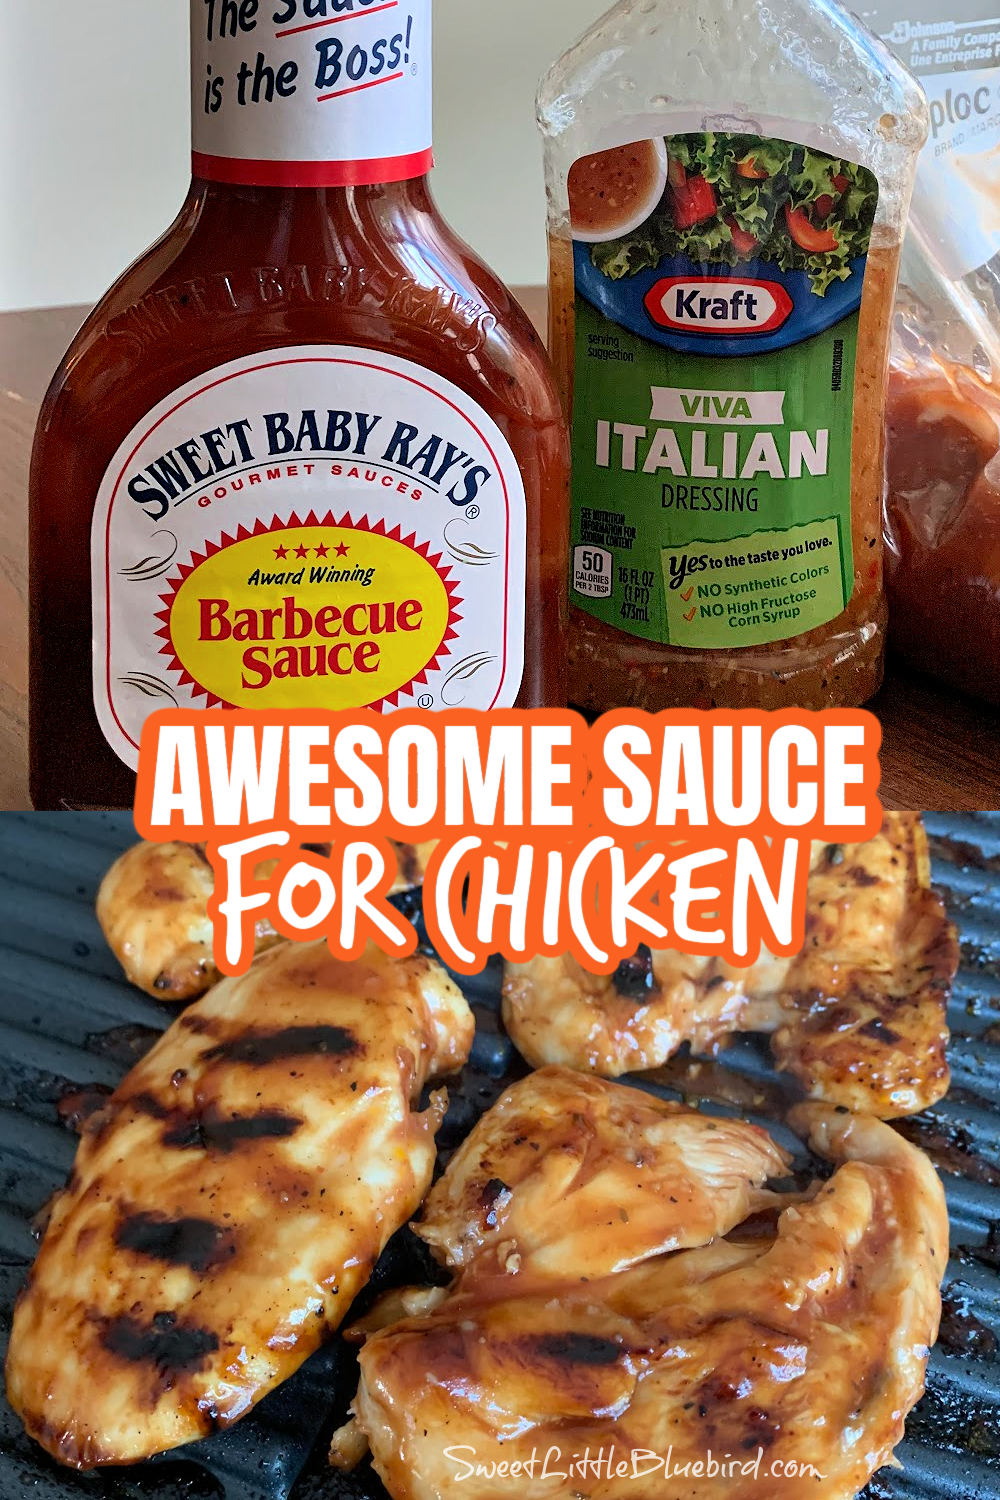 This is a 2 photo collage. The top photo shows a bottle of Sweet Baby Ray's Barbecue Sauce and a bottle of Kraft Zesty Italian Dressing. Bottom photo show pieces of grilled chicken.